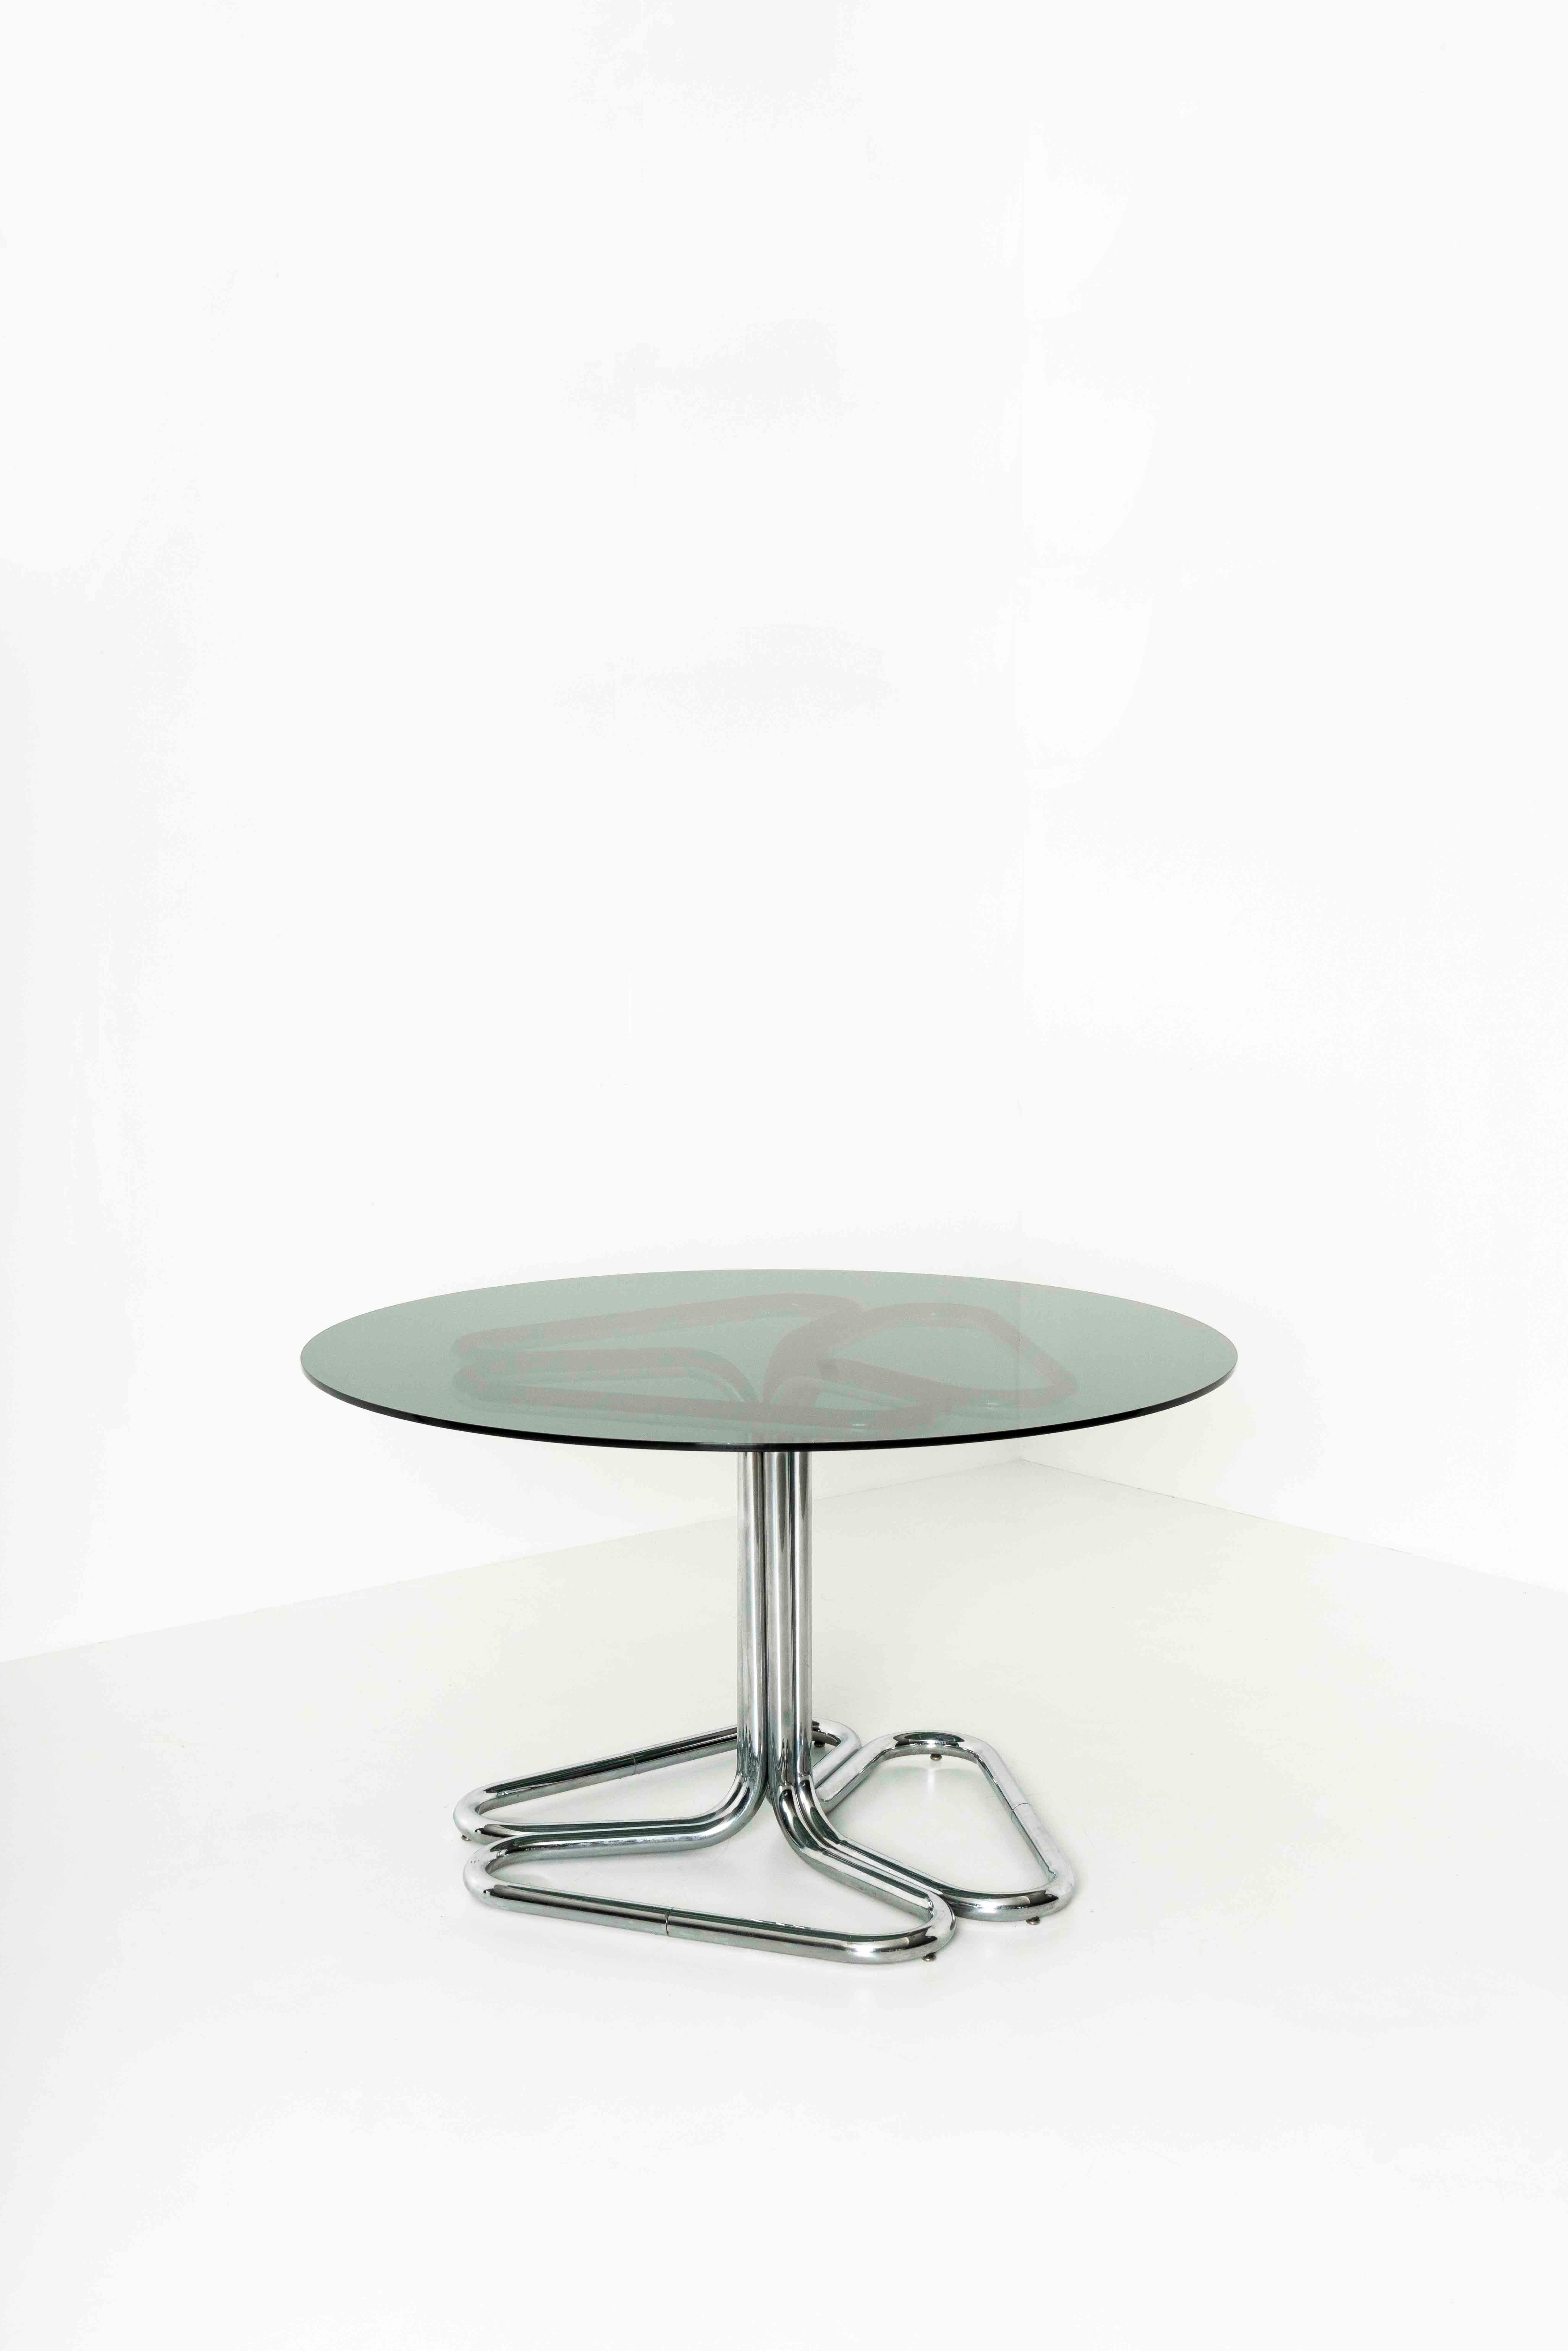 Italian Tubular Dining Room Table in Chrome and Smoked Glass by Giotto Stoppino, 1970s For Sale